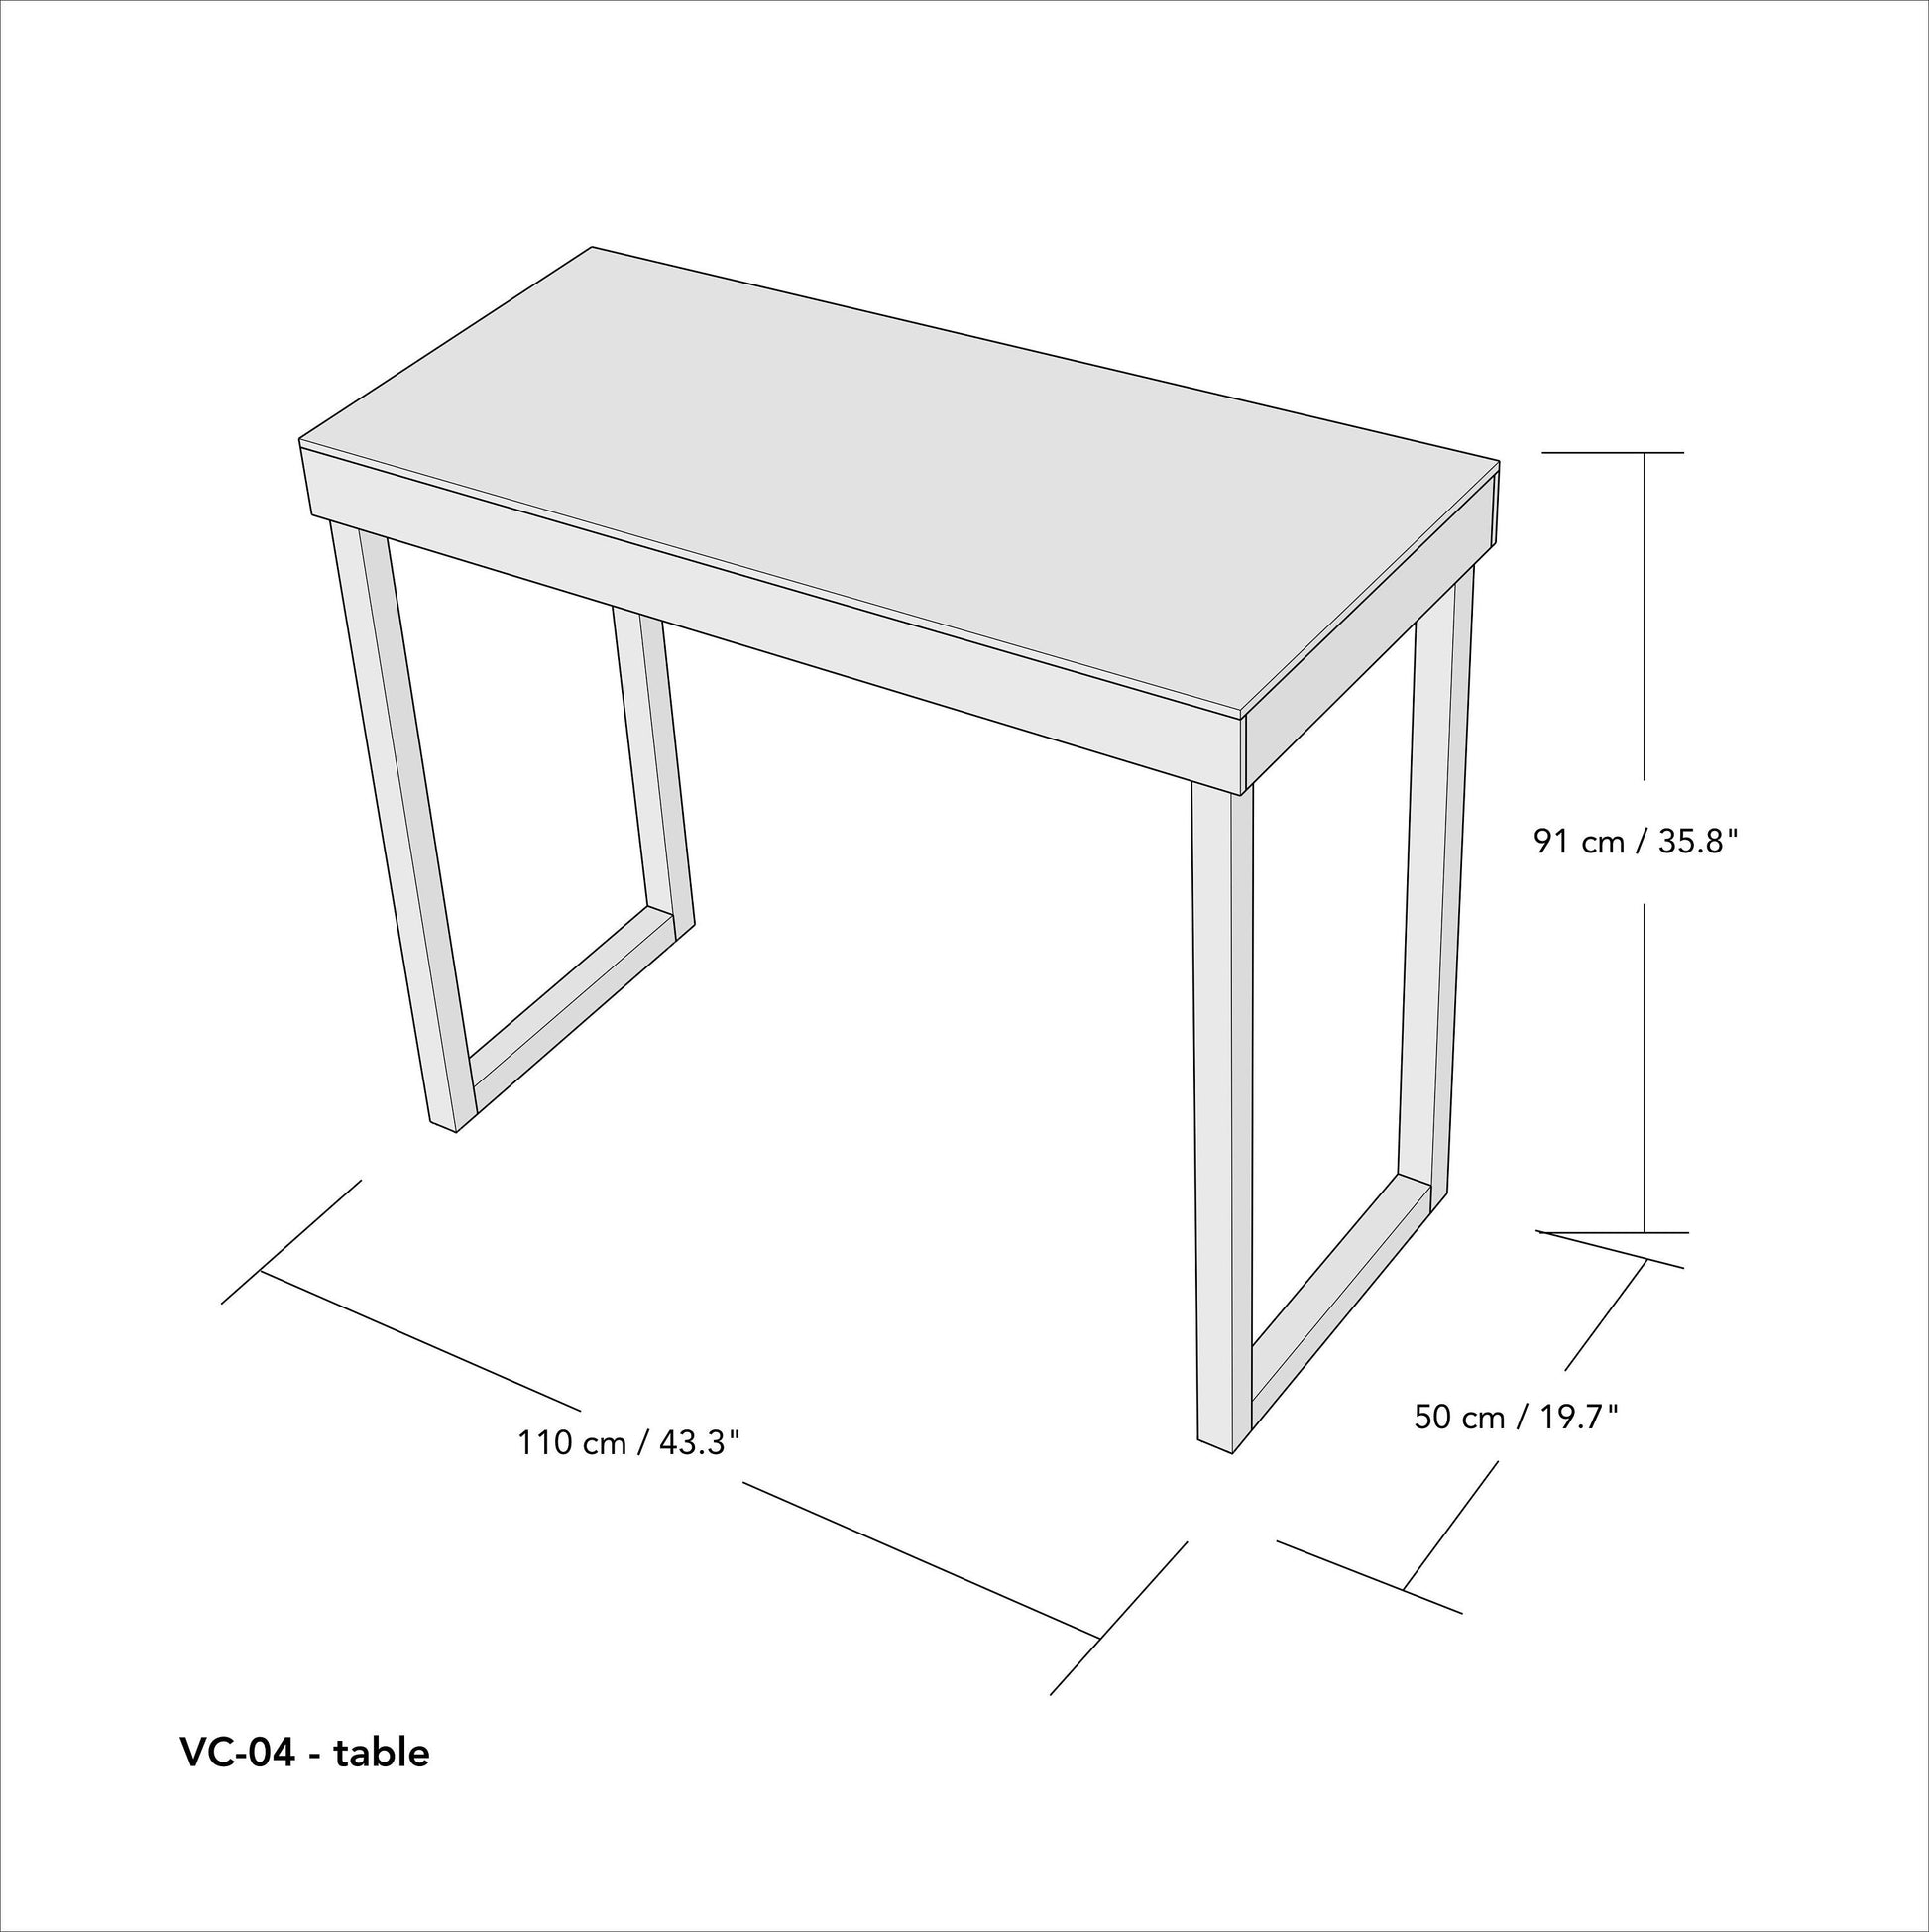 Display table VC-04-CF, foldable, portable, for trade fairs and events, product presentations, meetings with customers, catering